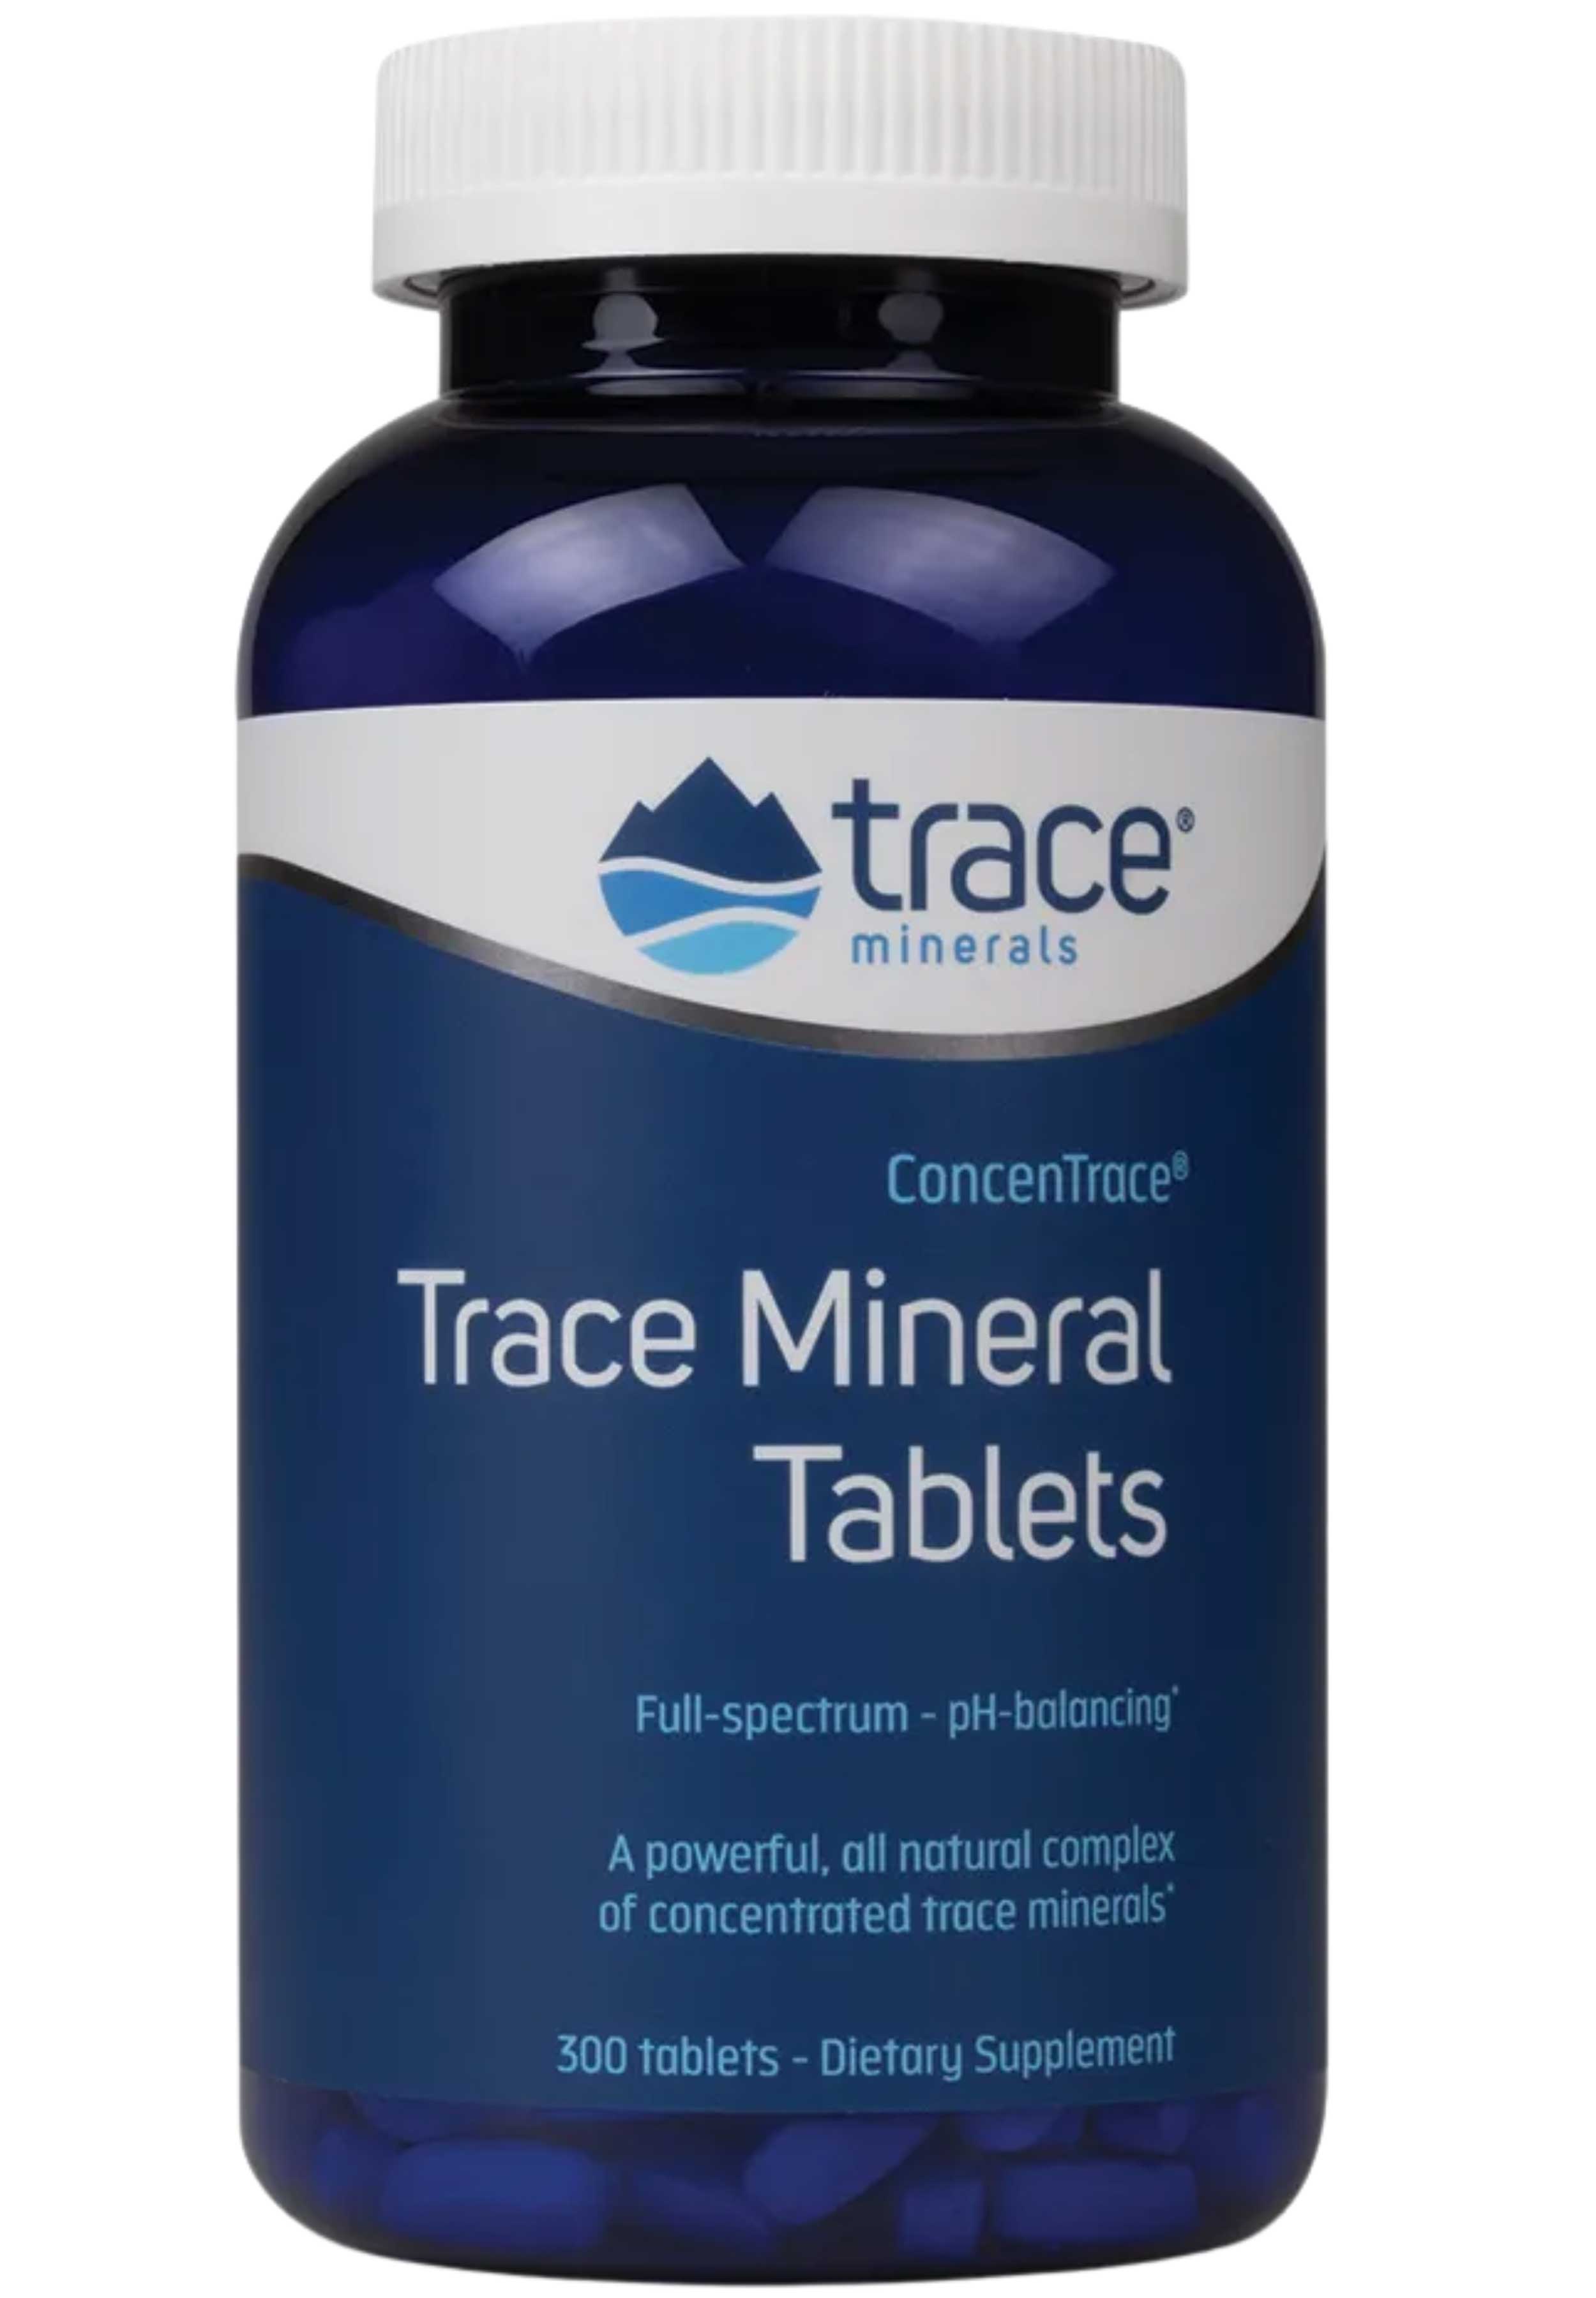 Trace Minerals Research Concentrace Trace Mineral Tablets 